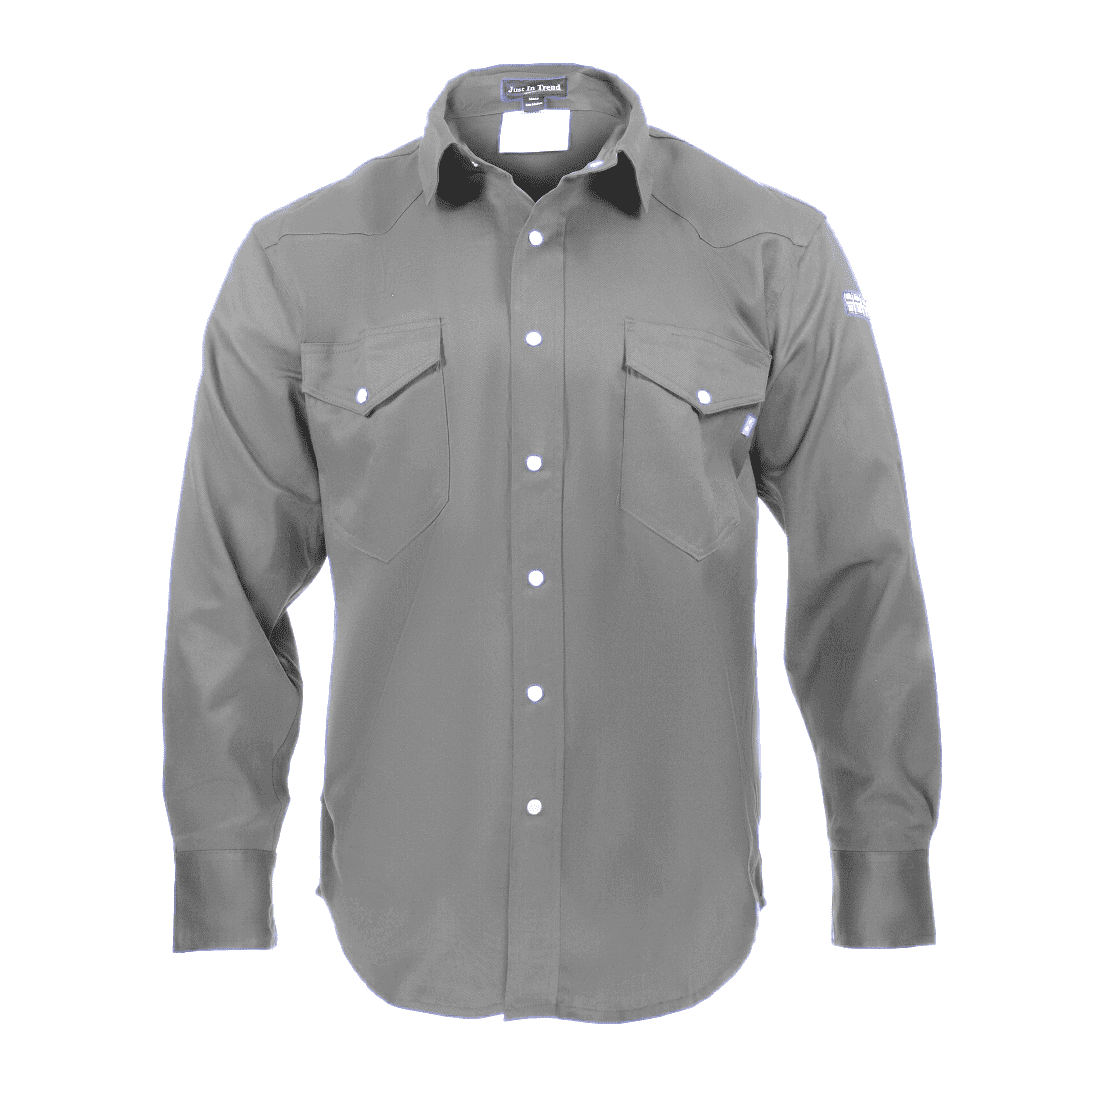 Two Tone Just In Trend │Flame Resistant FR Shirt Western Style 88/12 